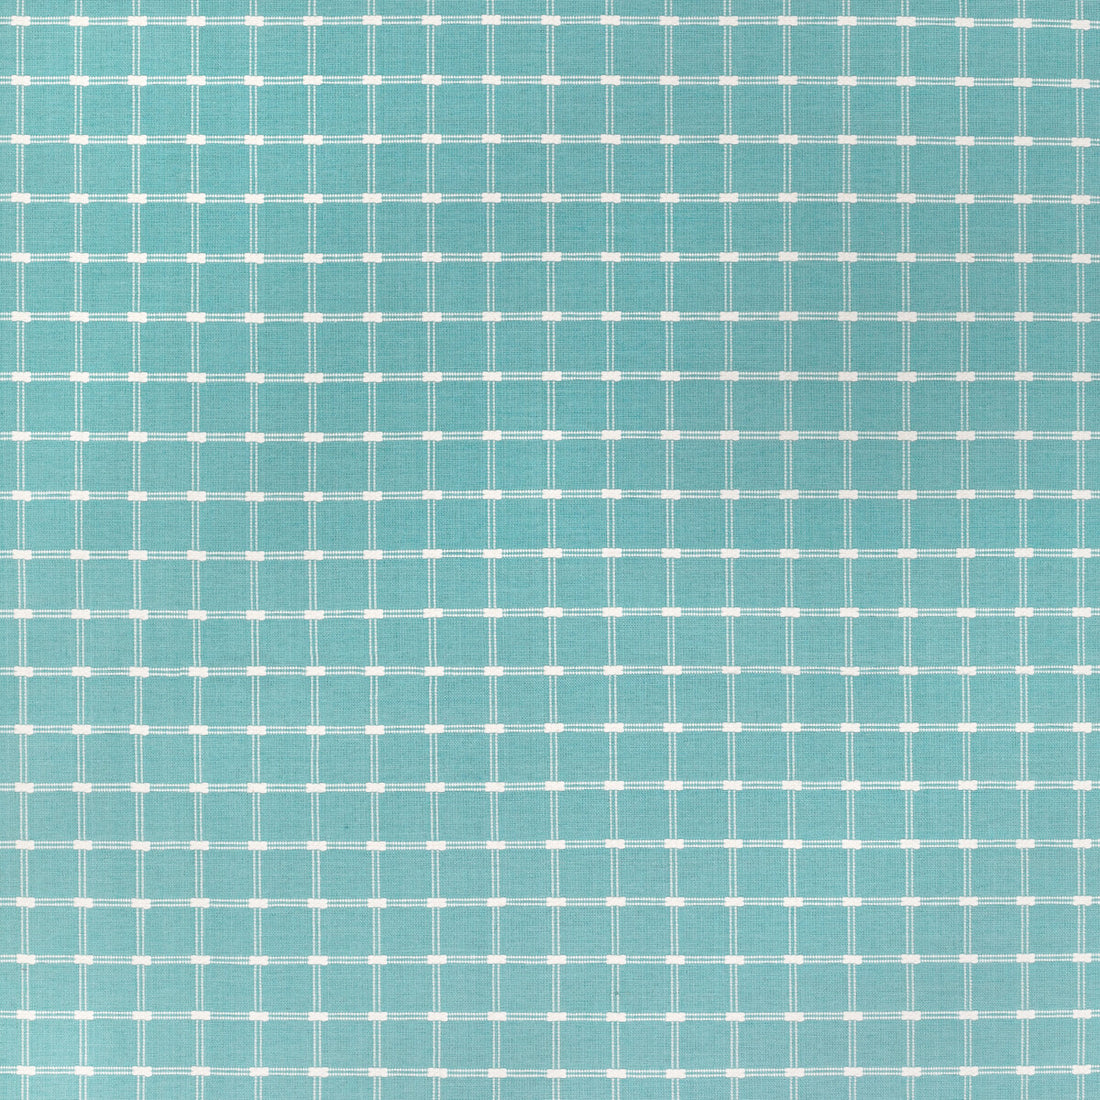 Lison Check fabric in aqua color - pattern 8022116.13.0 - by Brunschwig &amp; Fils in the Normant Checks And Stripes II collection